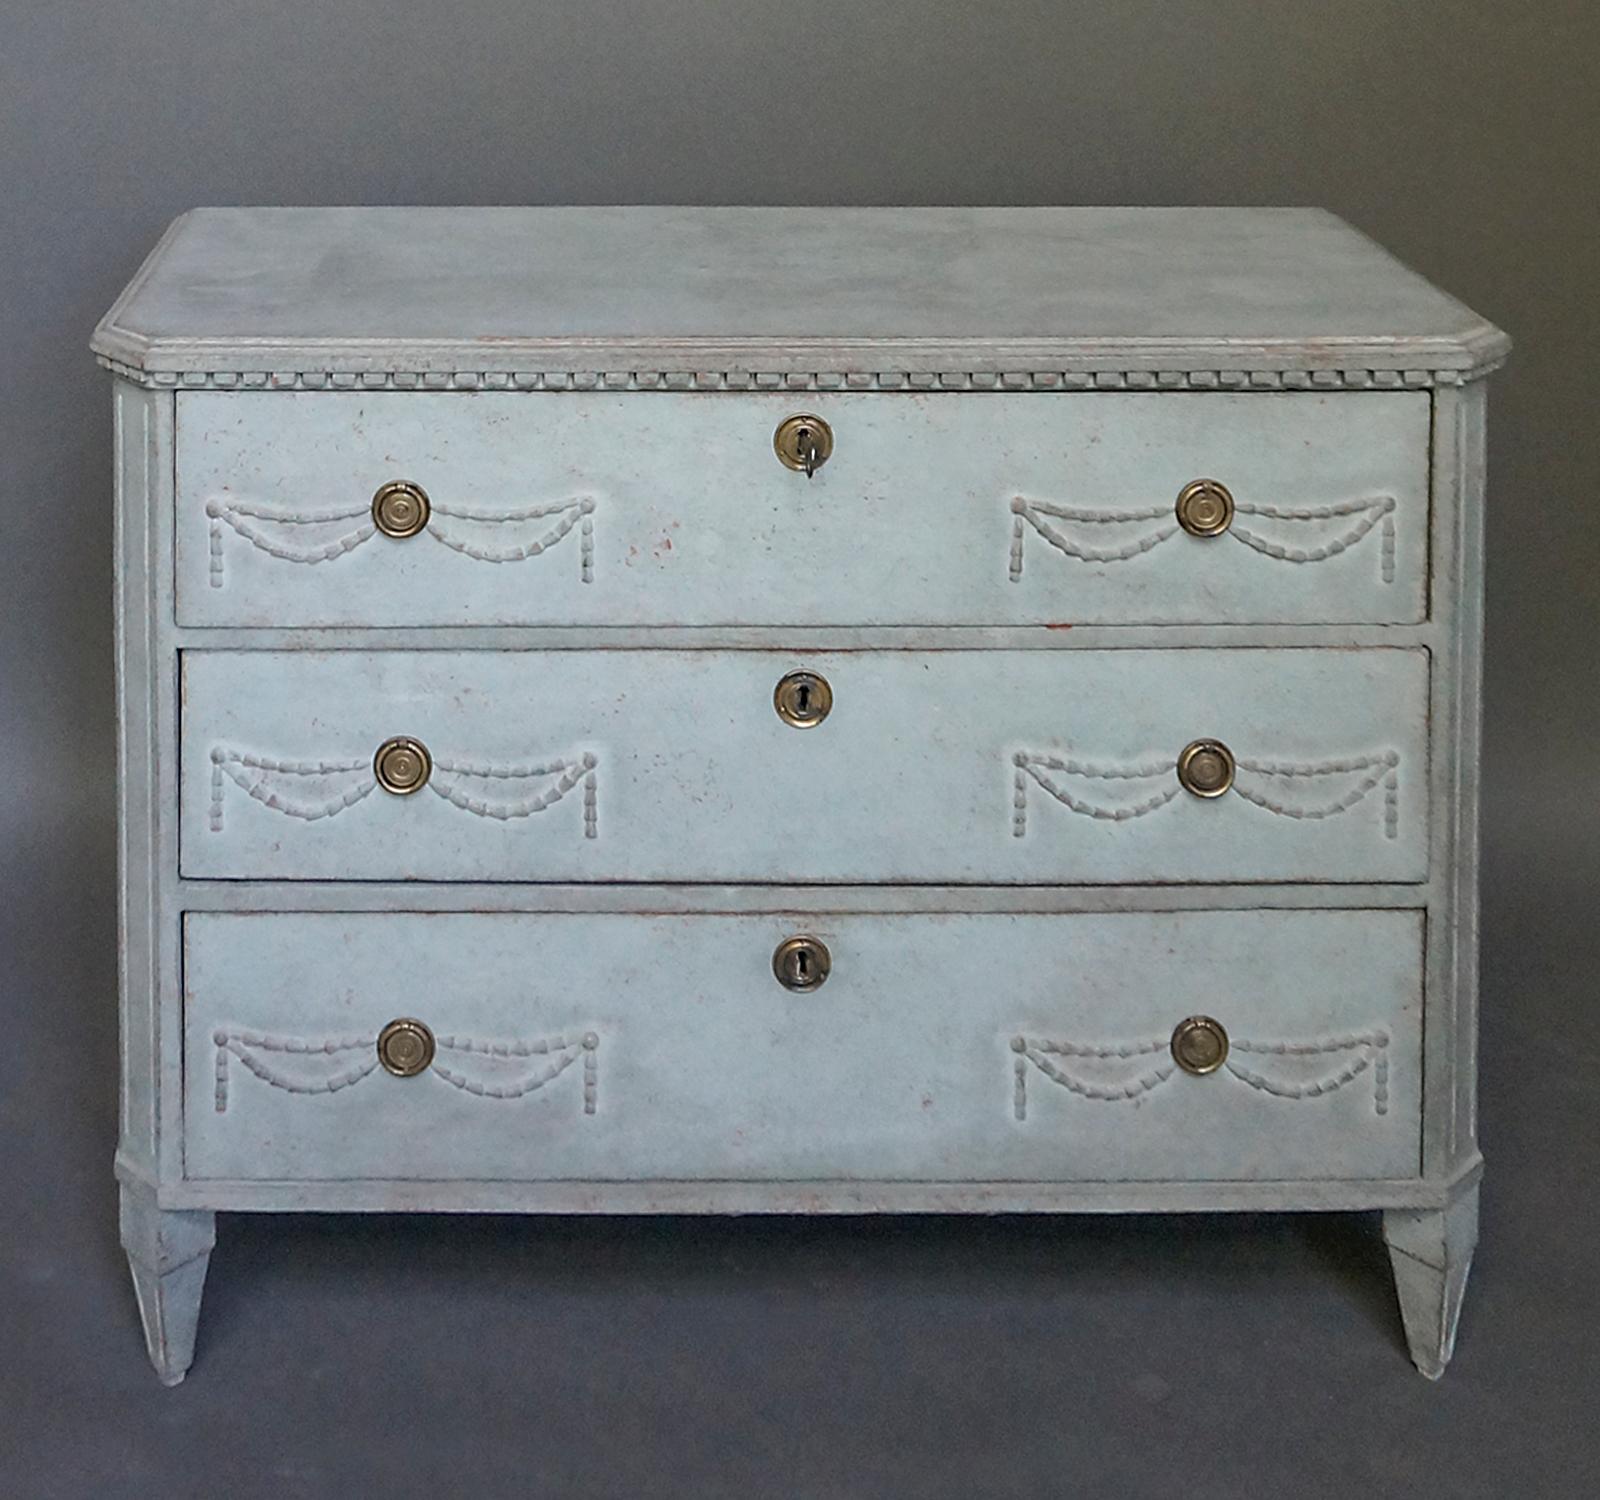 Gustavian chest of drawers, Sweden circa 1880, with applied swag detail. Shaped top with dentil molding, canted corners and tapering square feet.